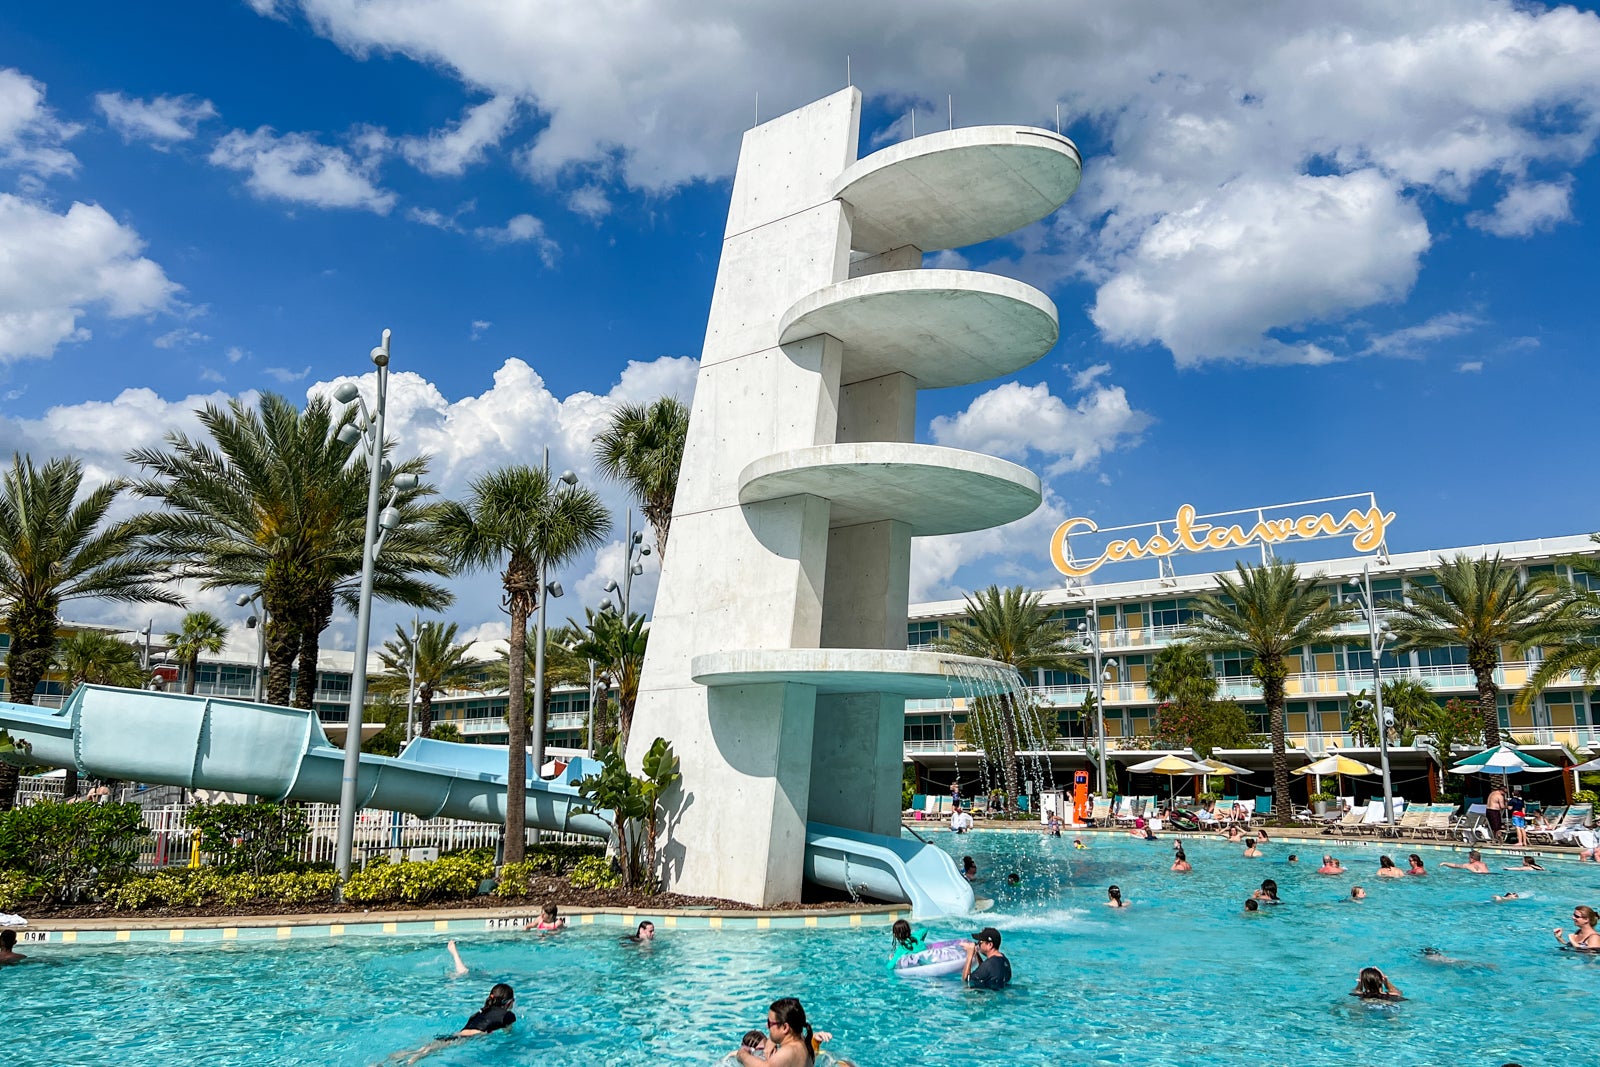 The pool at Universal's Cabana Bay Beach Resort with a waterslide.